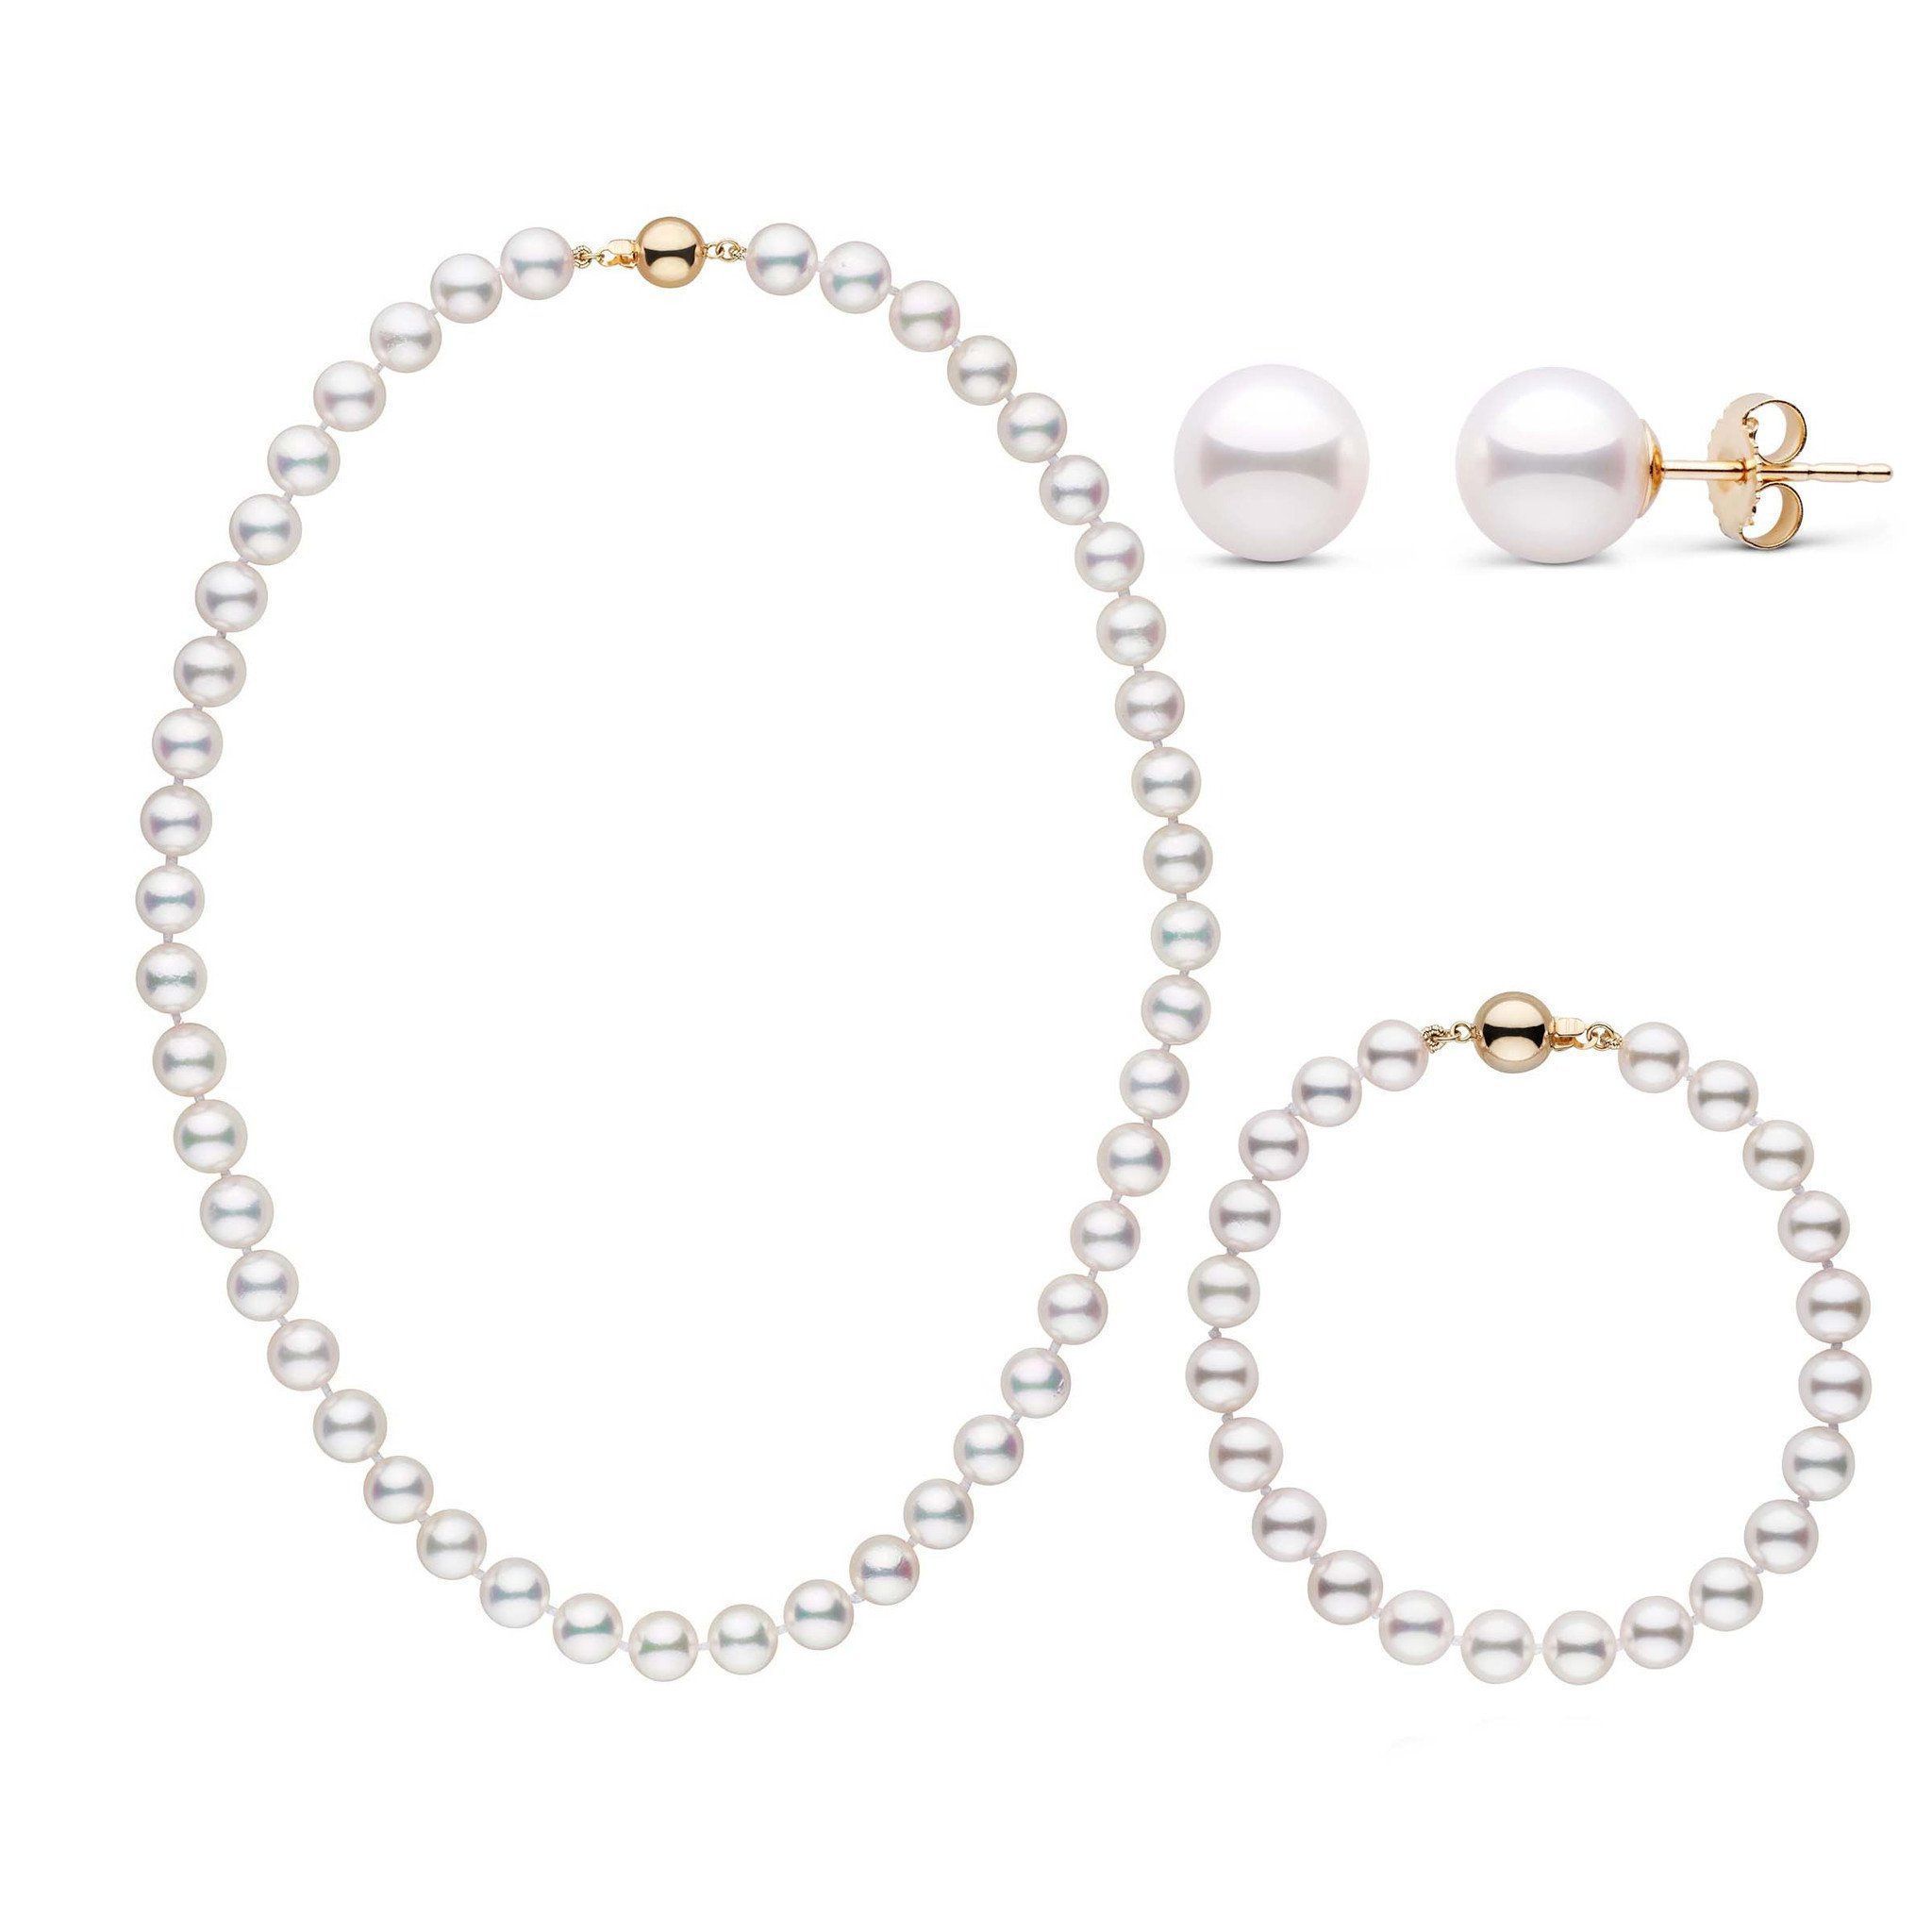 16 Inch 3 Piece Set of 7.0-7.5 mm AAA White Akoya Pearls Yellow Gold